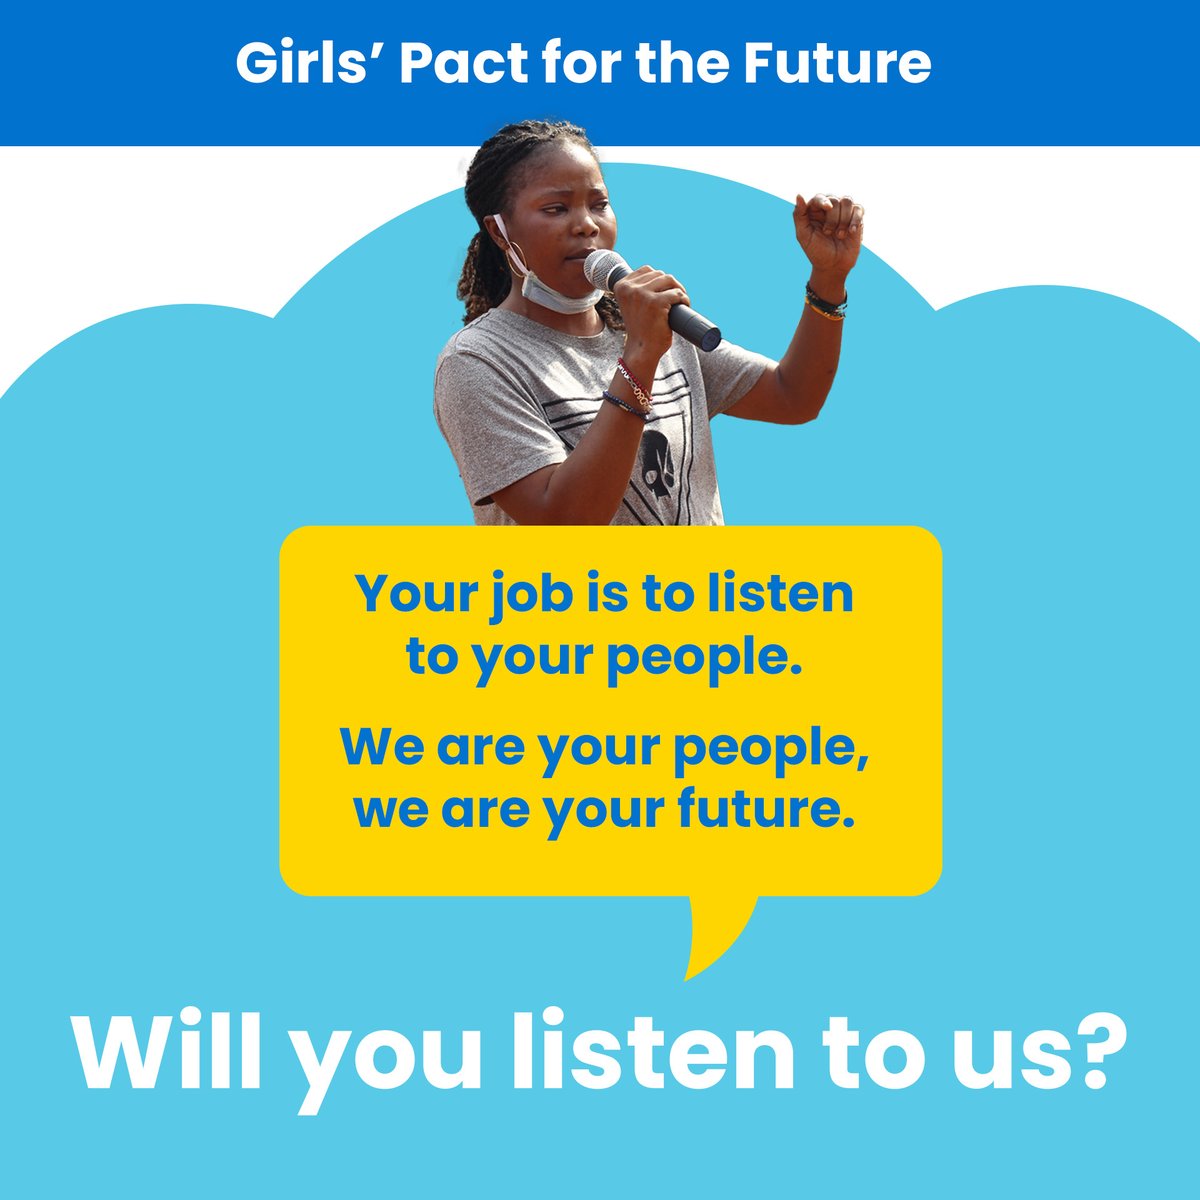 Young people are raising their voices, demanding a seat at the decision-making tables that shape all our futures. #FutureGirlsWant #SummitoftheFuture Let's build a world where EVERY girl can lead change in her community: plan-international.org/girls-pact